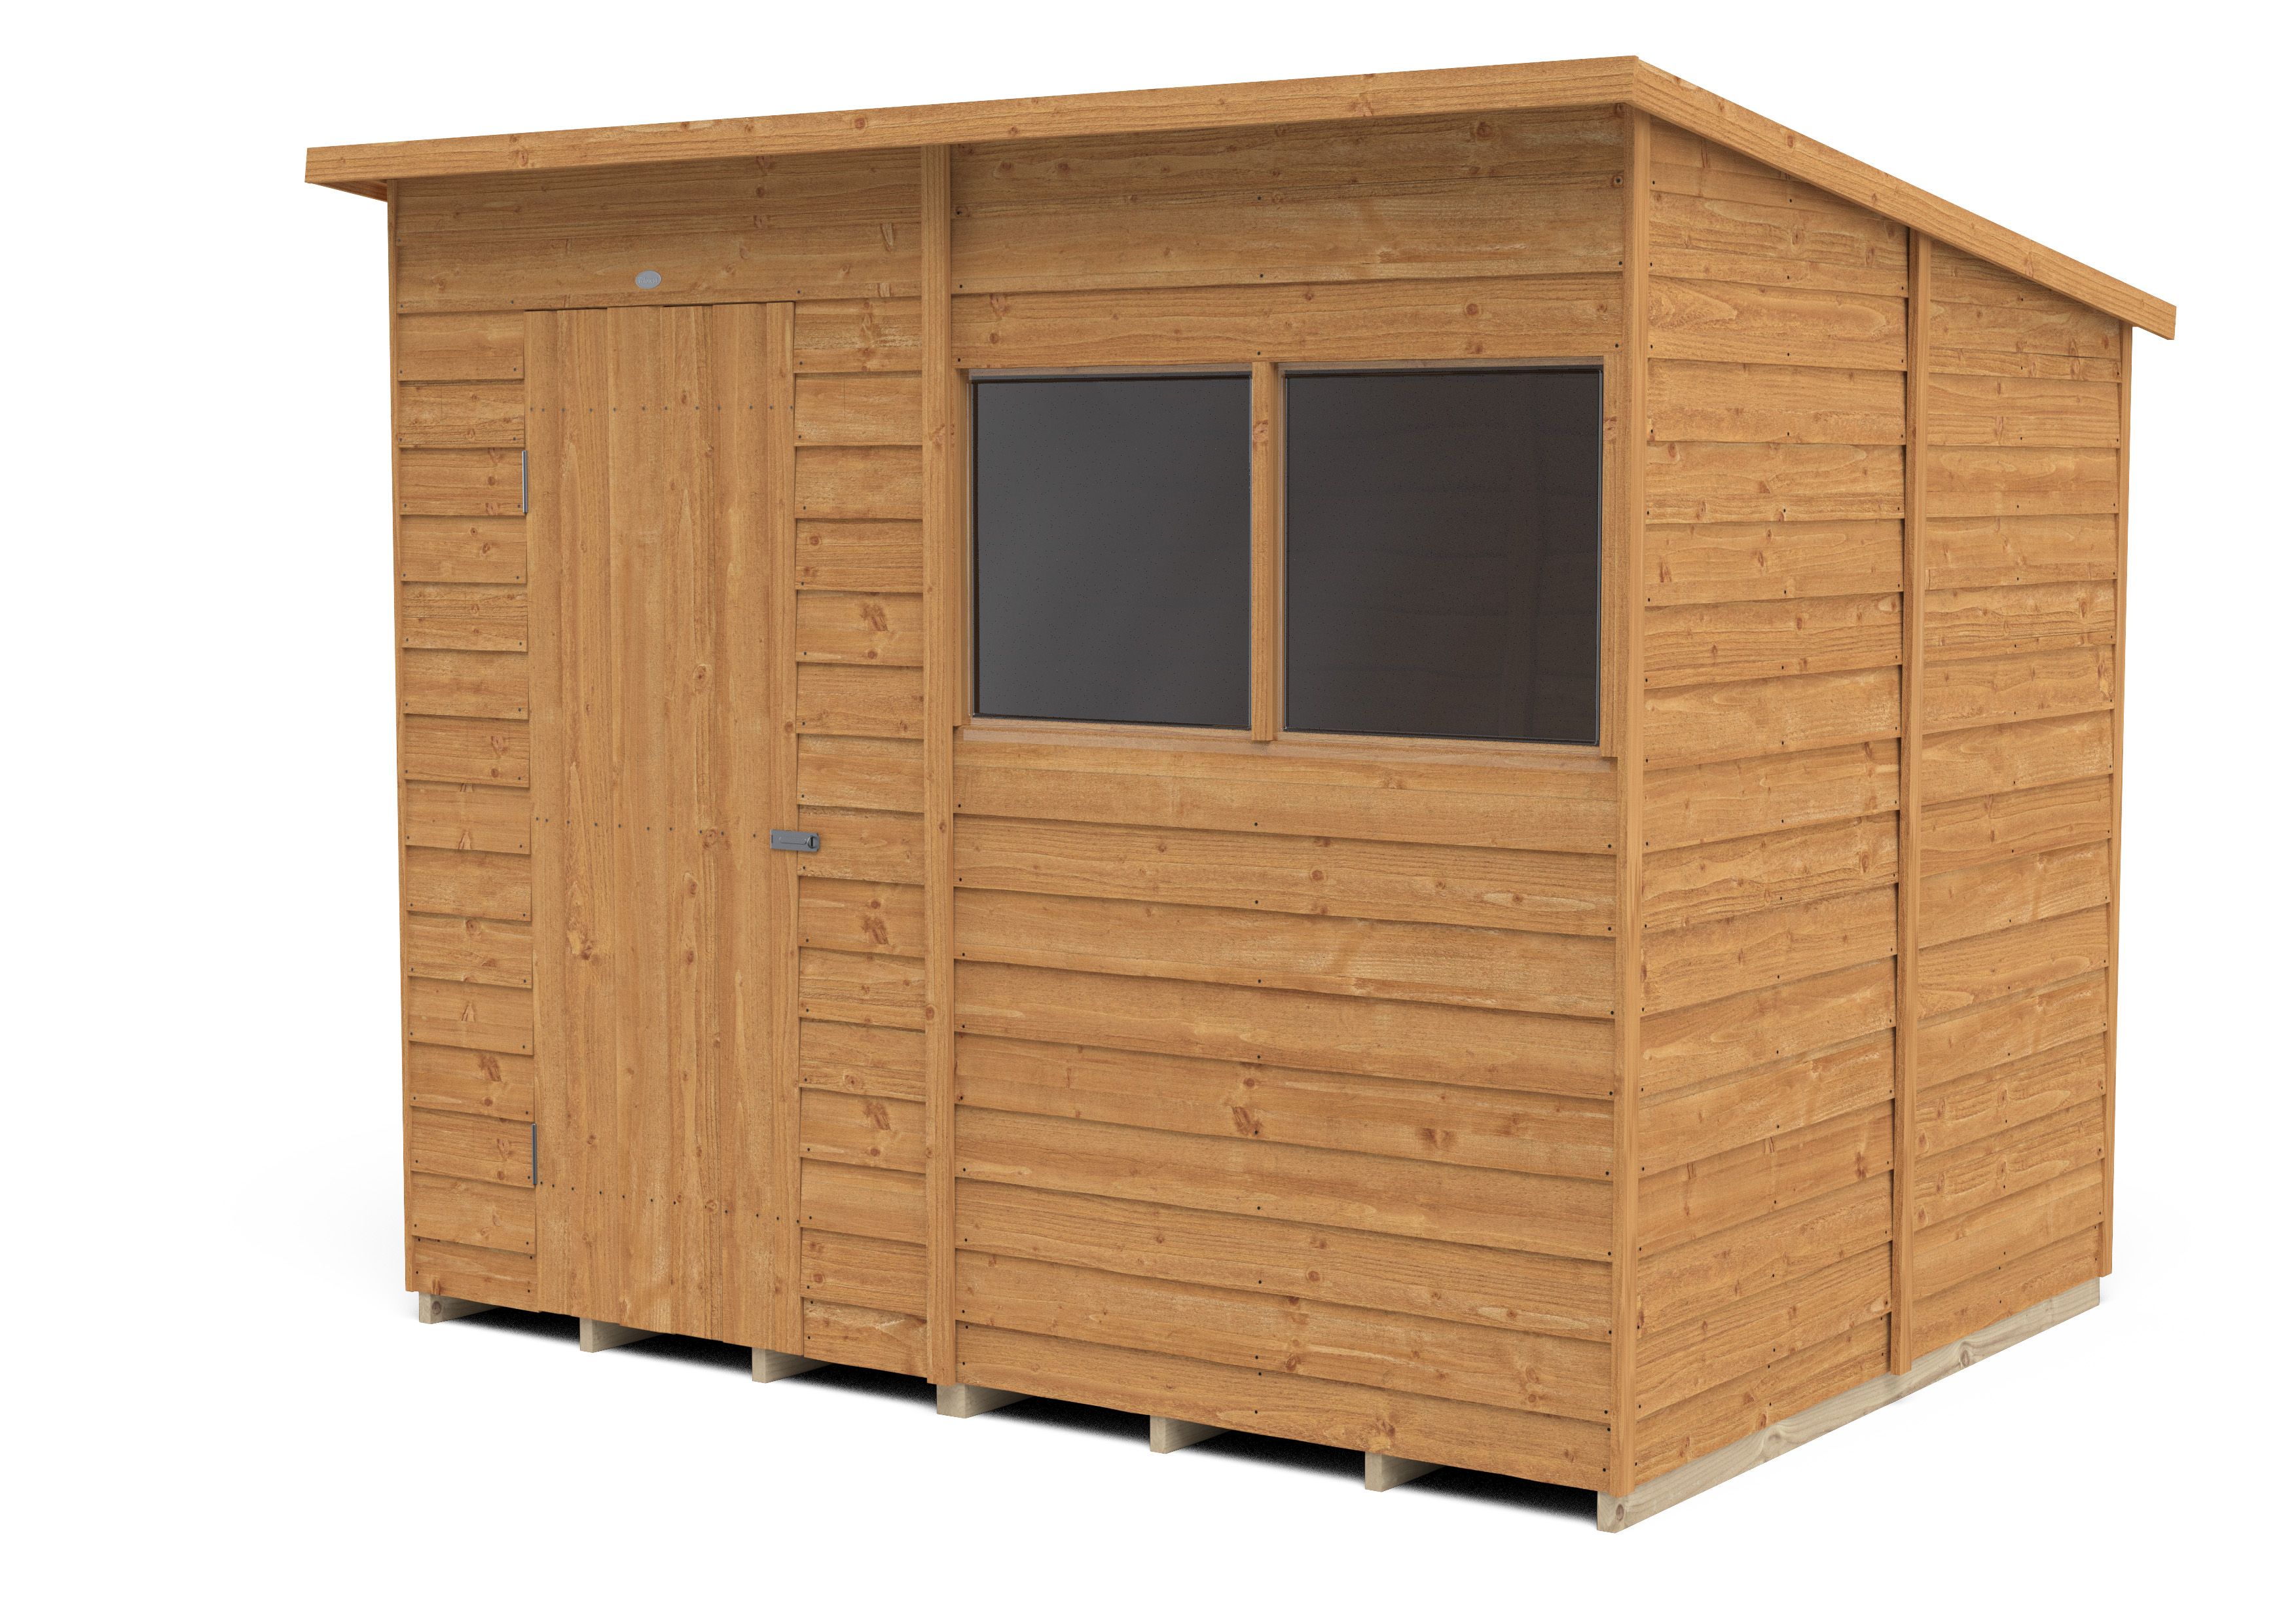 Forest Garden Overlap 8x6 ft Pent Wooden Dip treated Shed with floor & 2 windows (Base included)